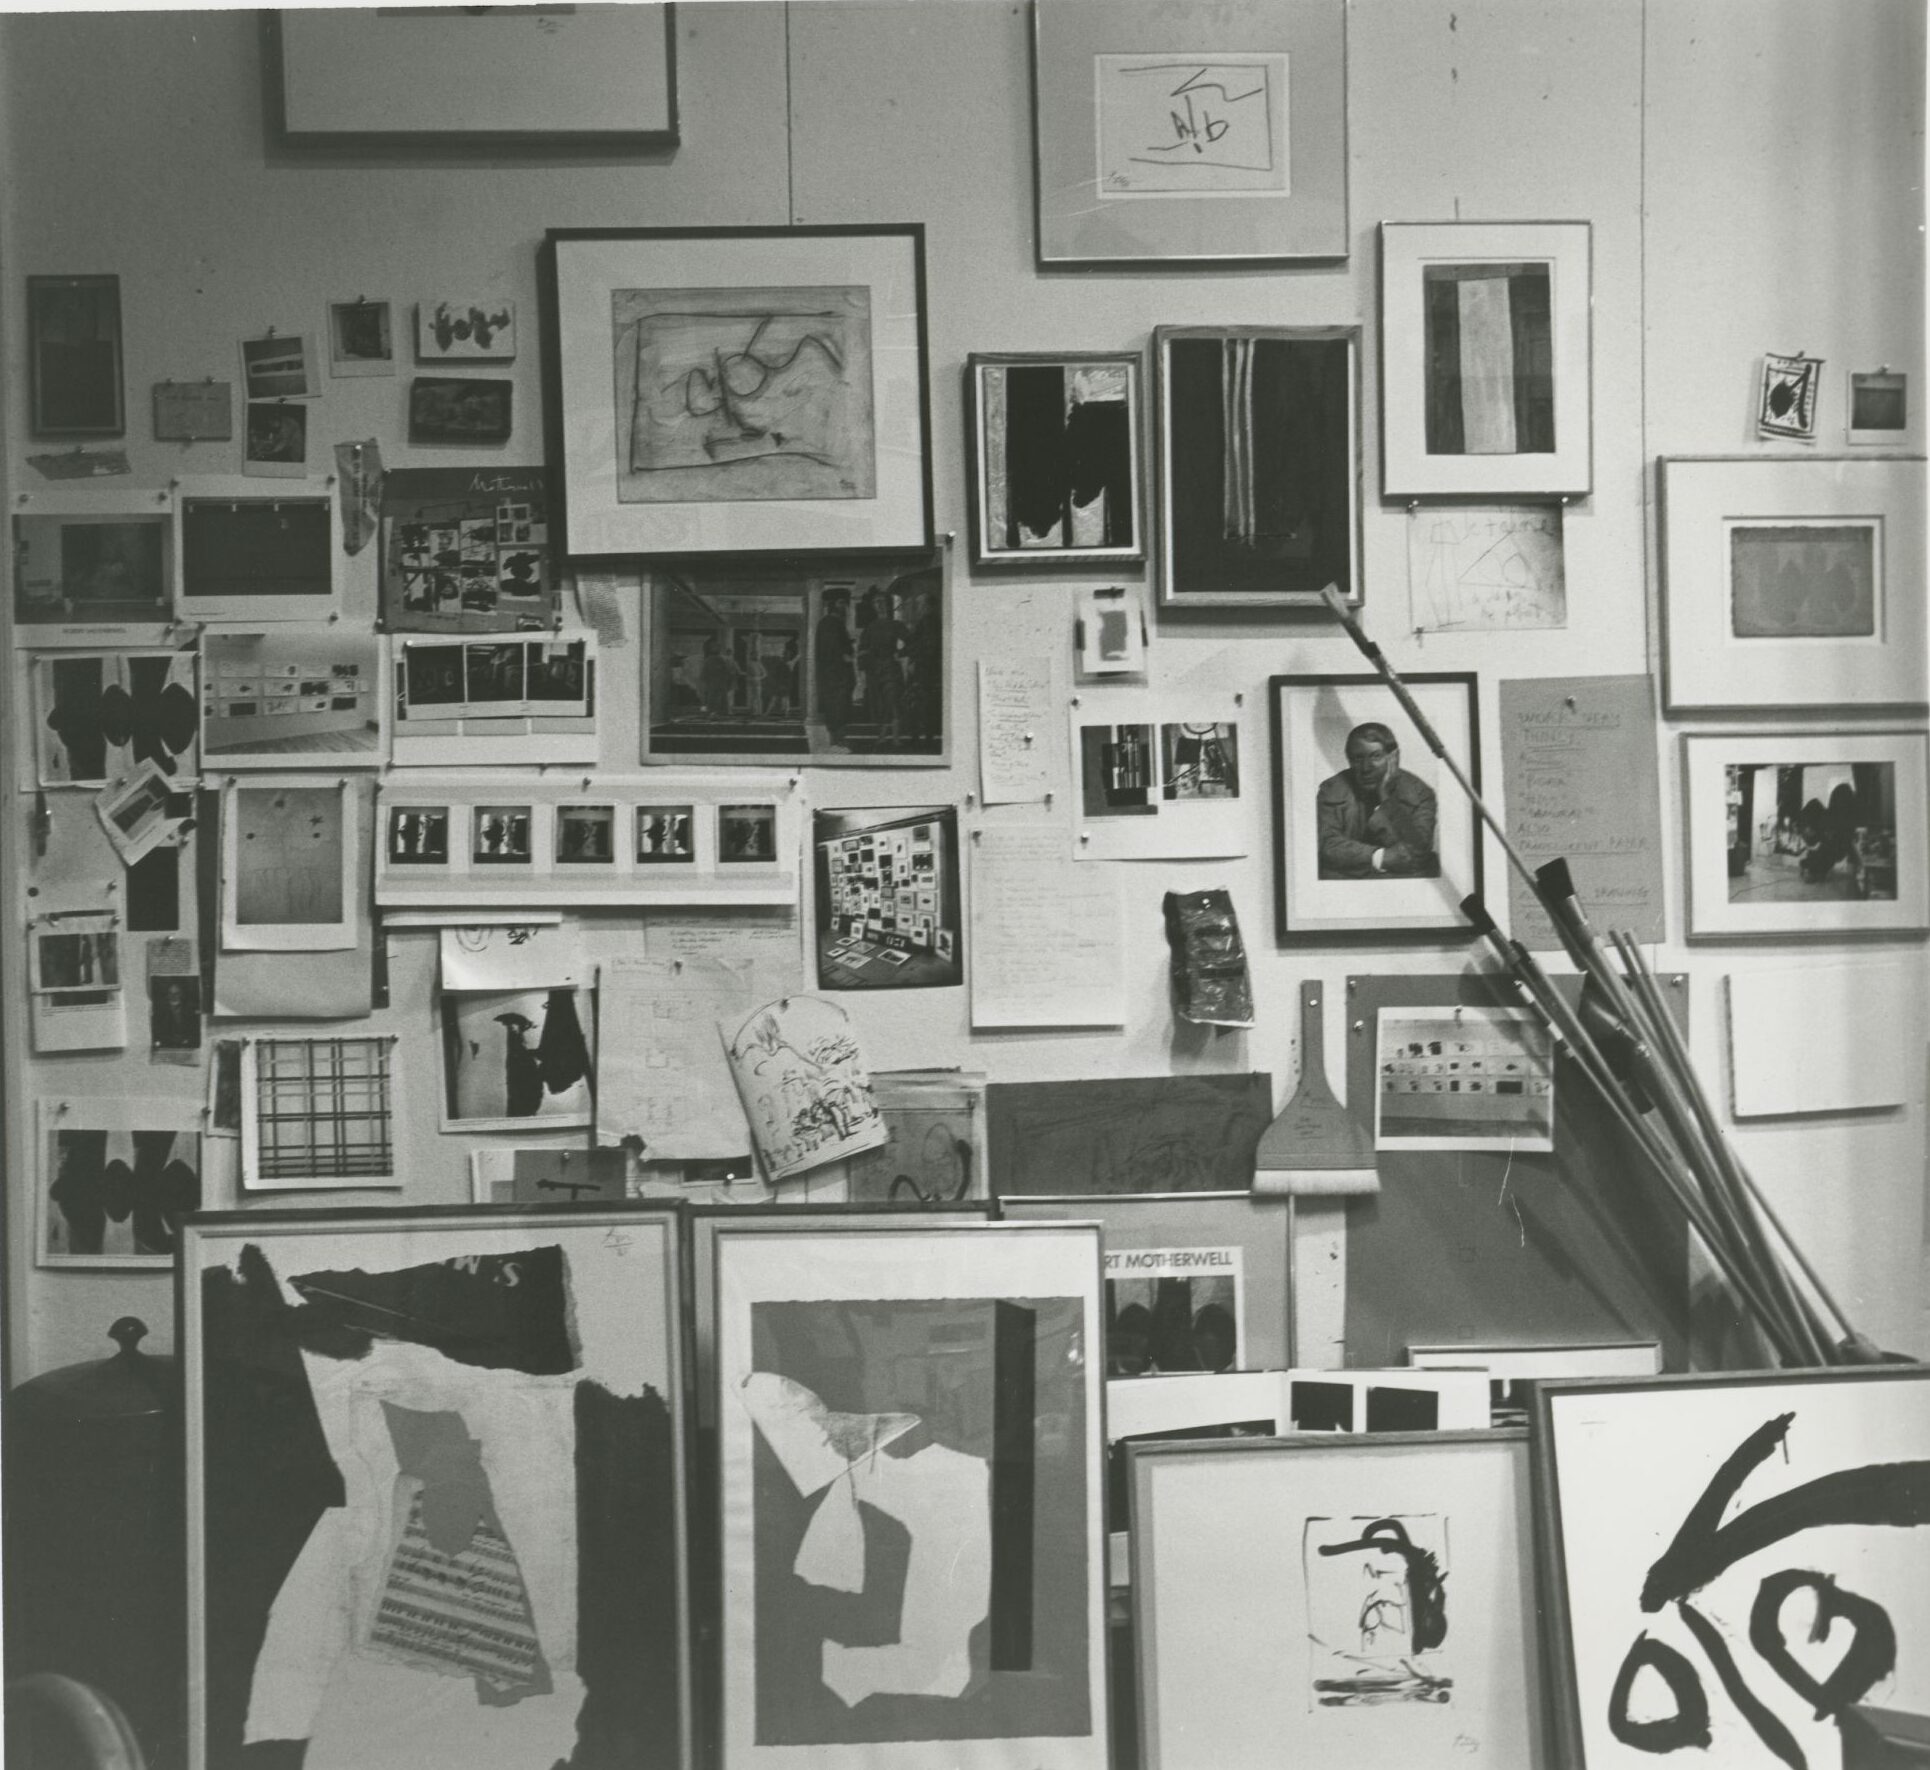 A crowded wall in Motherwell's studio